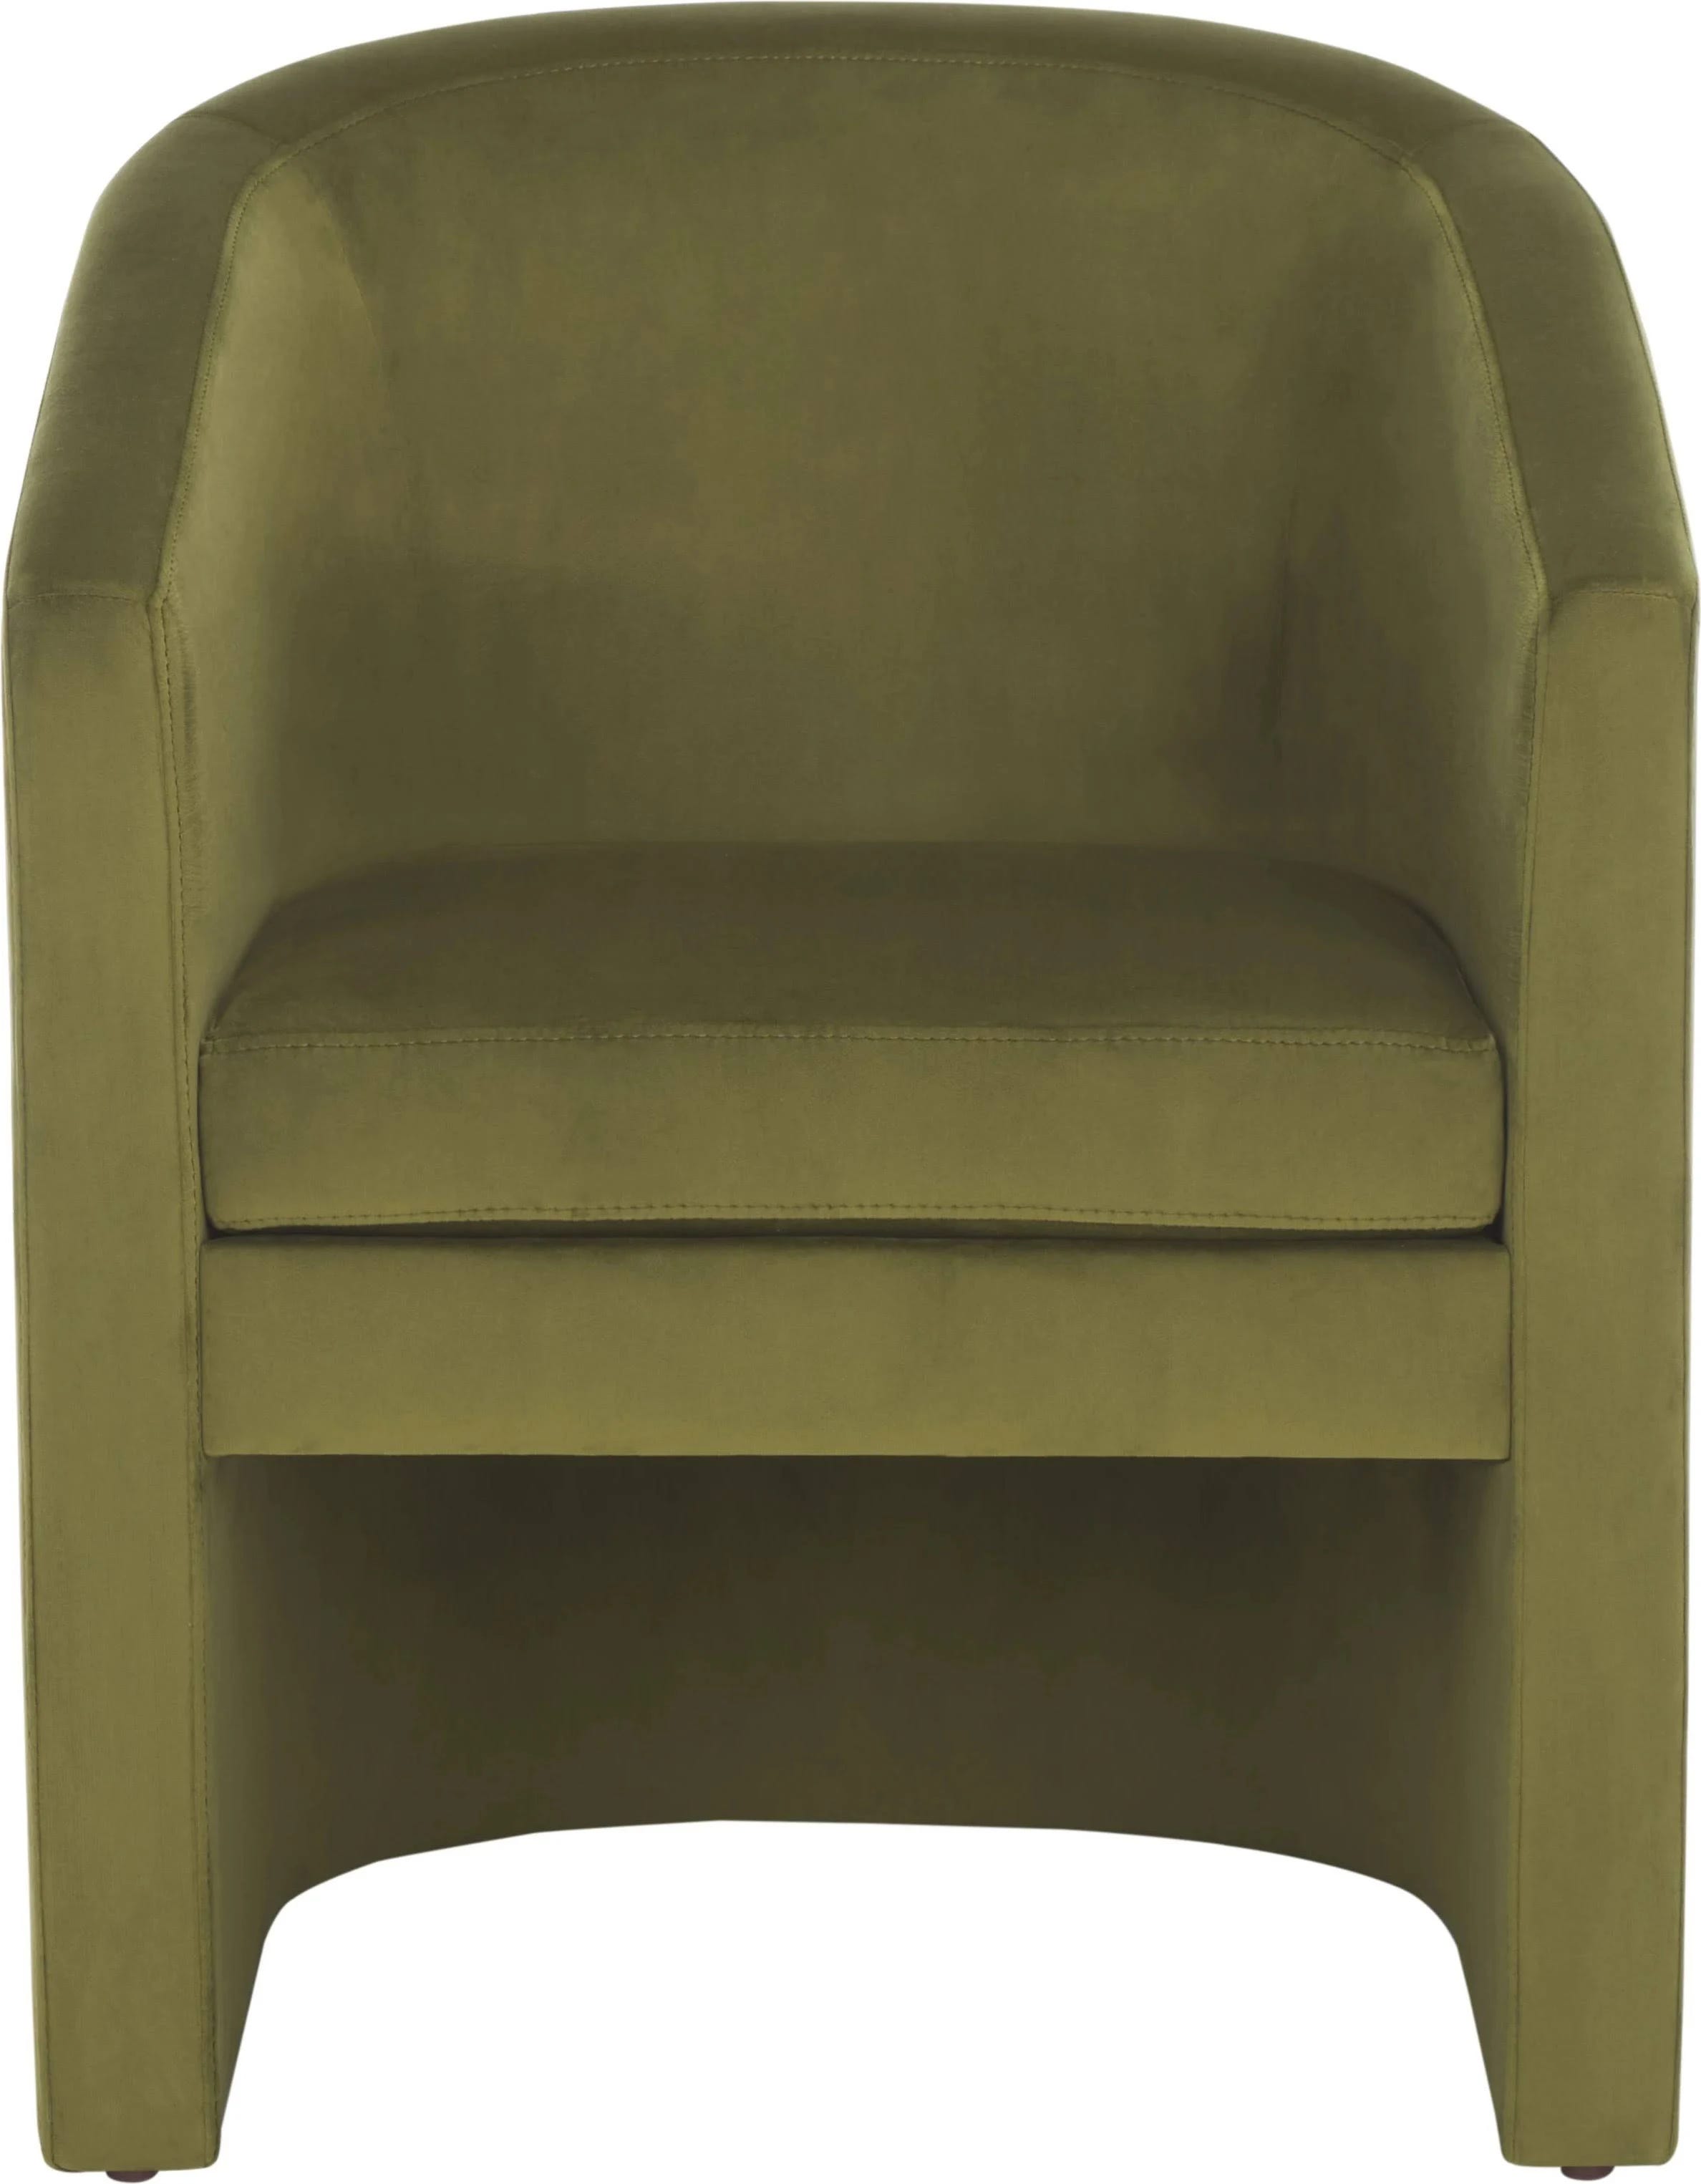 Olive Green Velvet Elysian Accent Chair for Relaxation and Style | Image